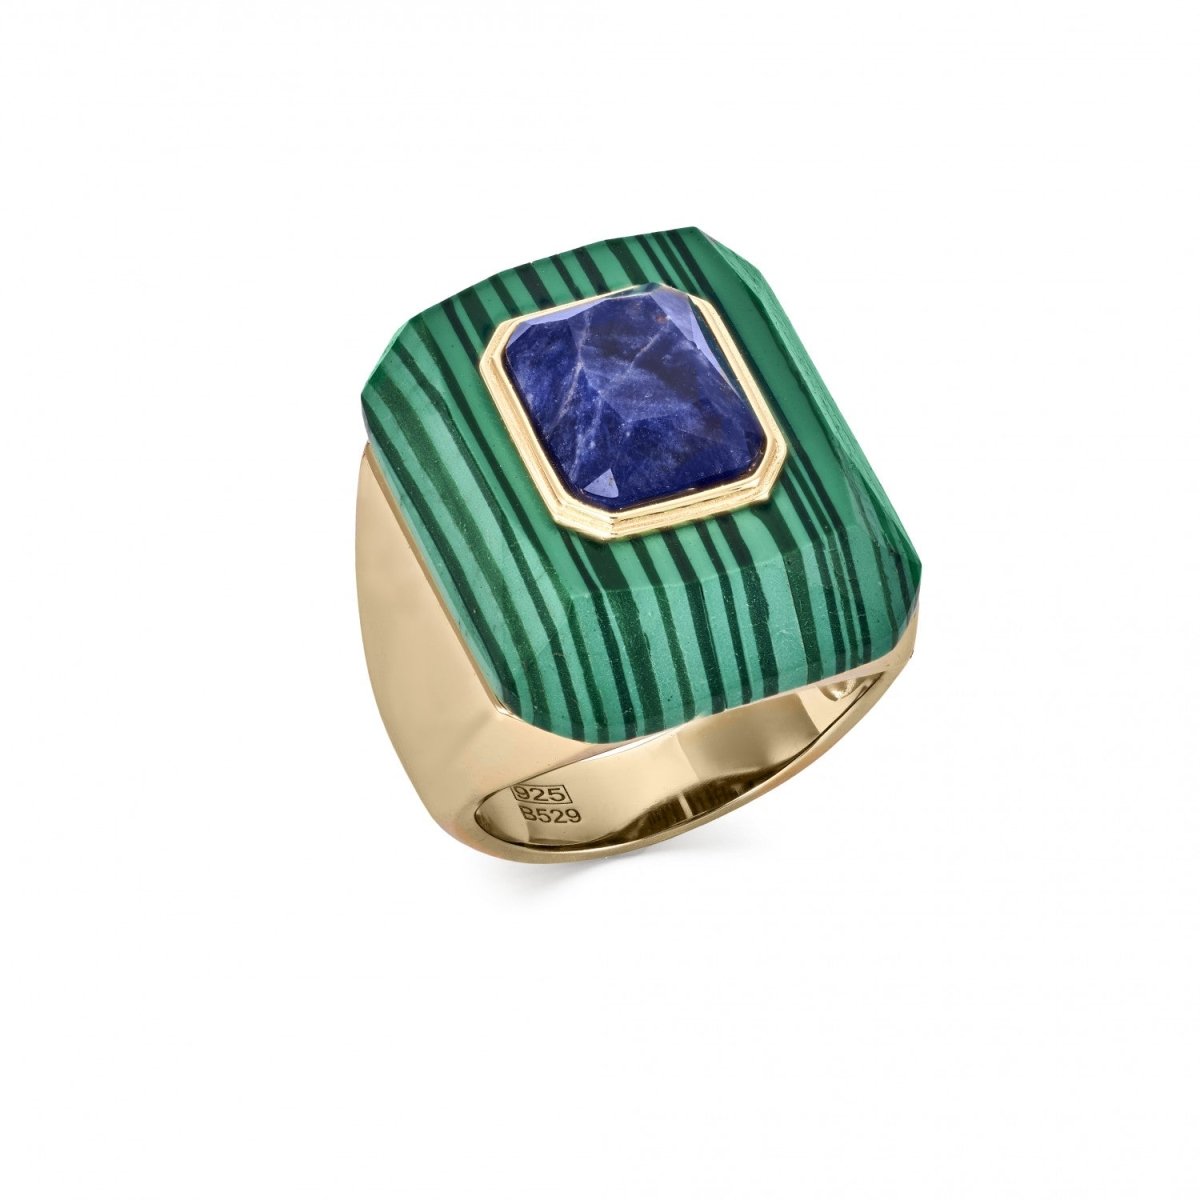 Ring - Rings with stones in green tones and central motif with navy blue stone